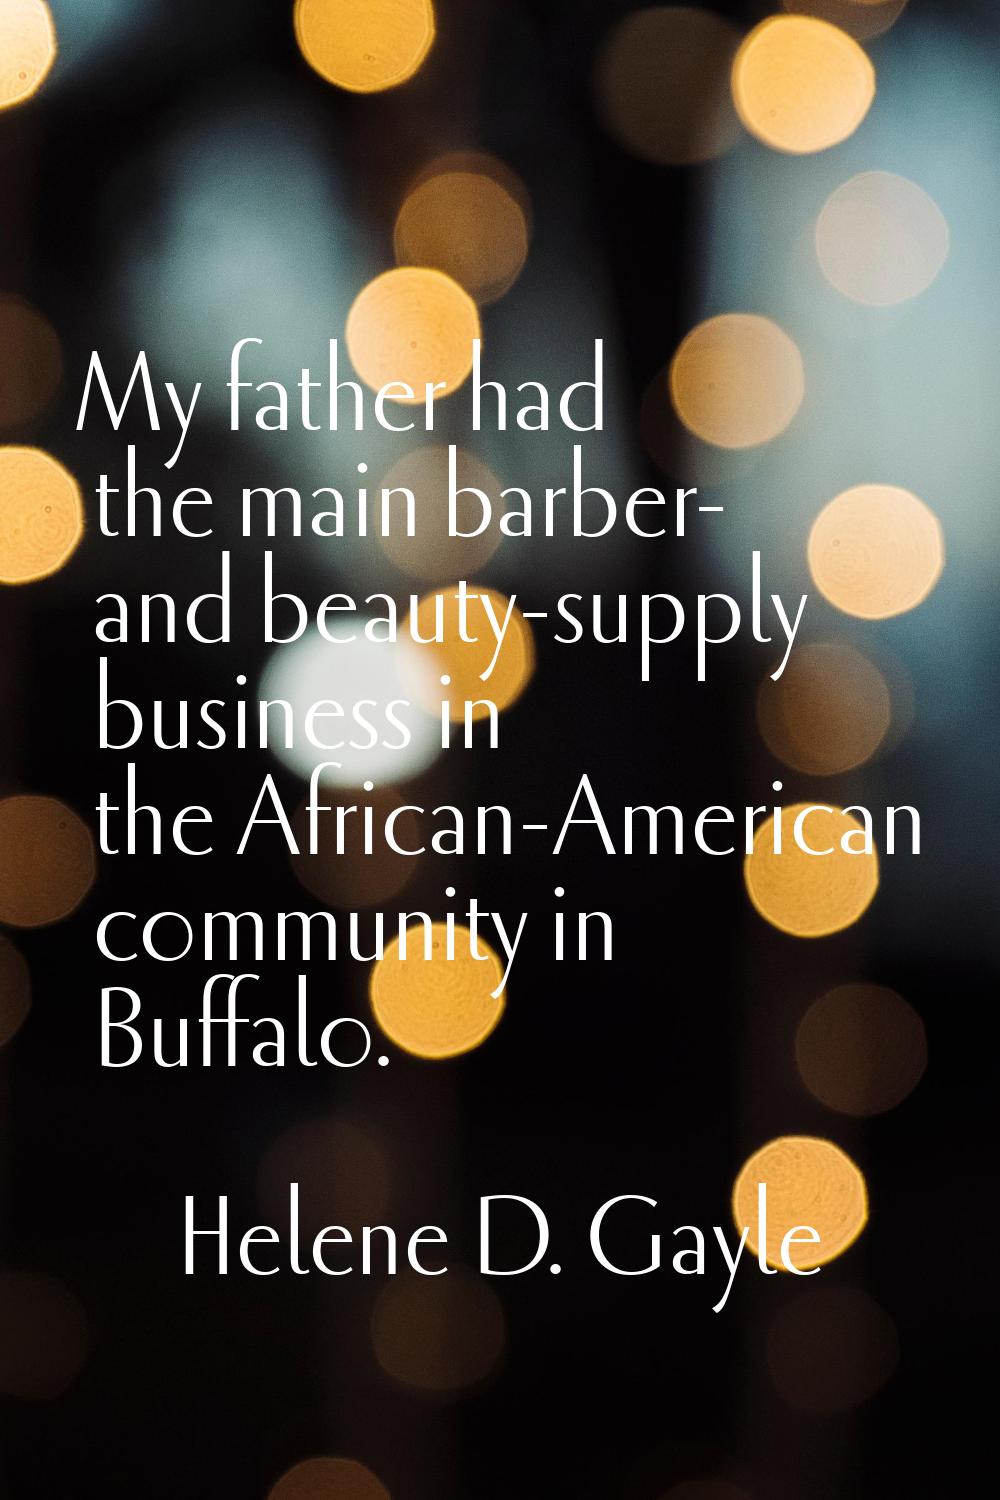 My father had the main barber- and beauty-supply business in the African-American community in Buff